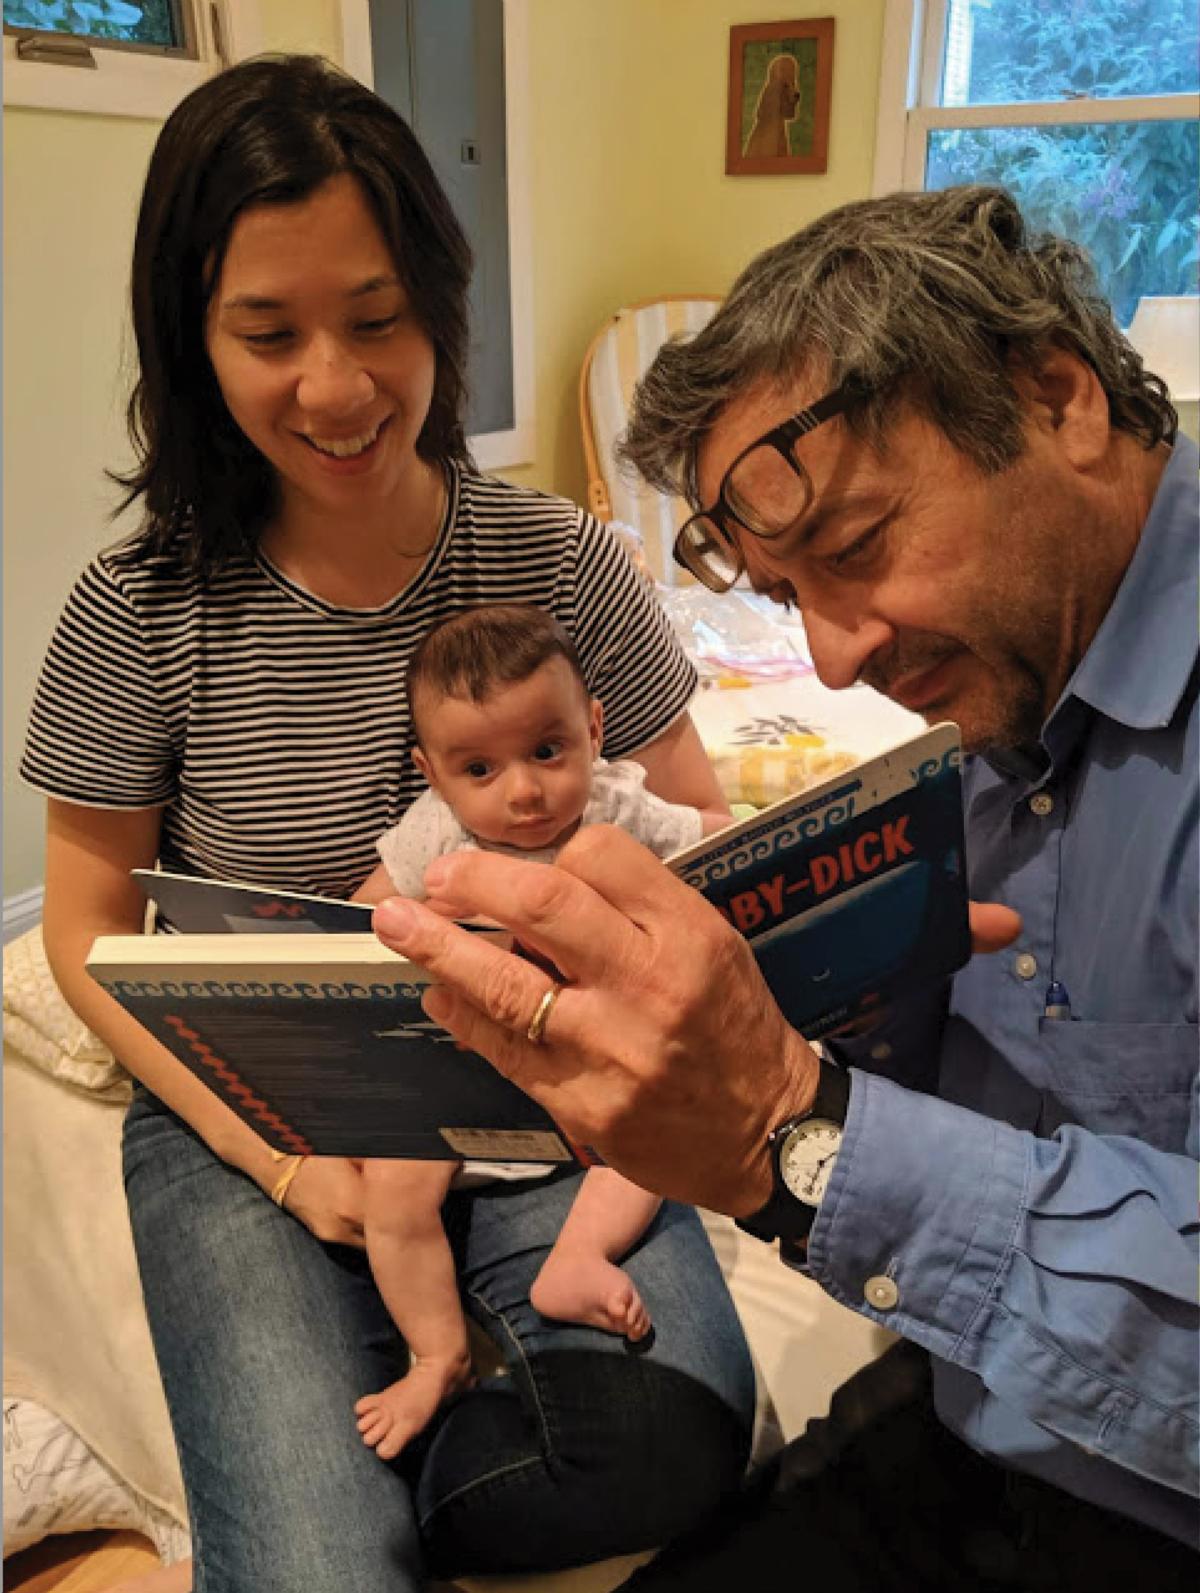 Delbanco reads Moby-Dick to his grandchild